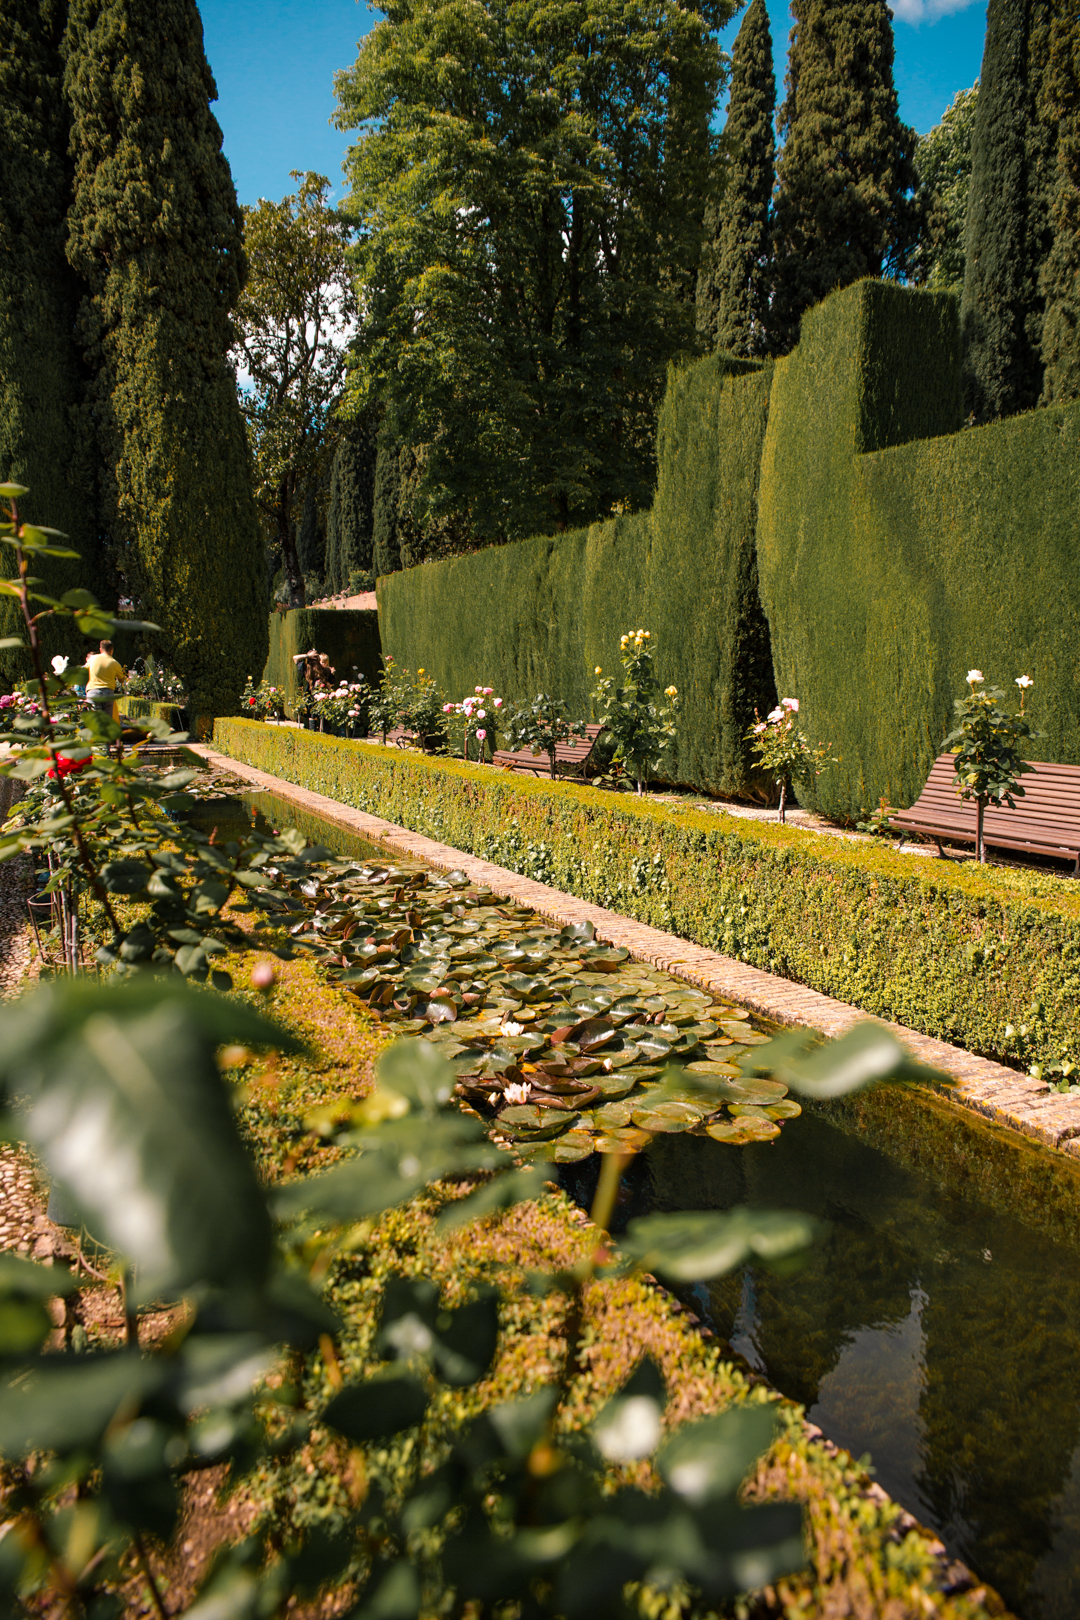 Pond and flowers in the gardens of Generalife in Alhambra, Granada, Southern Spain.